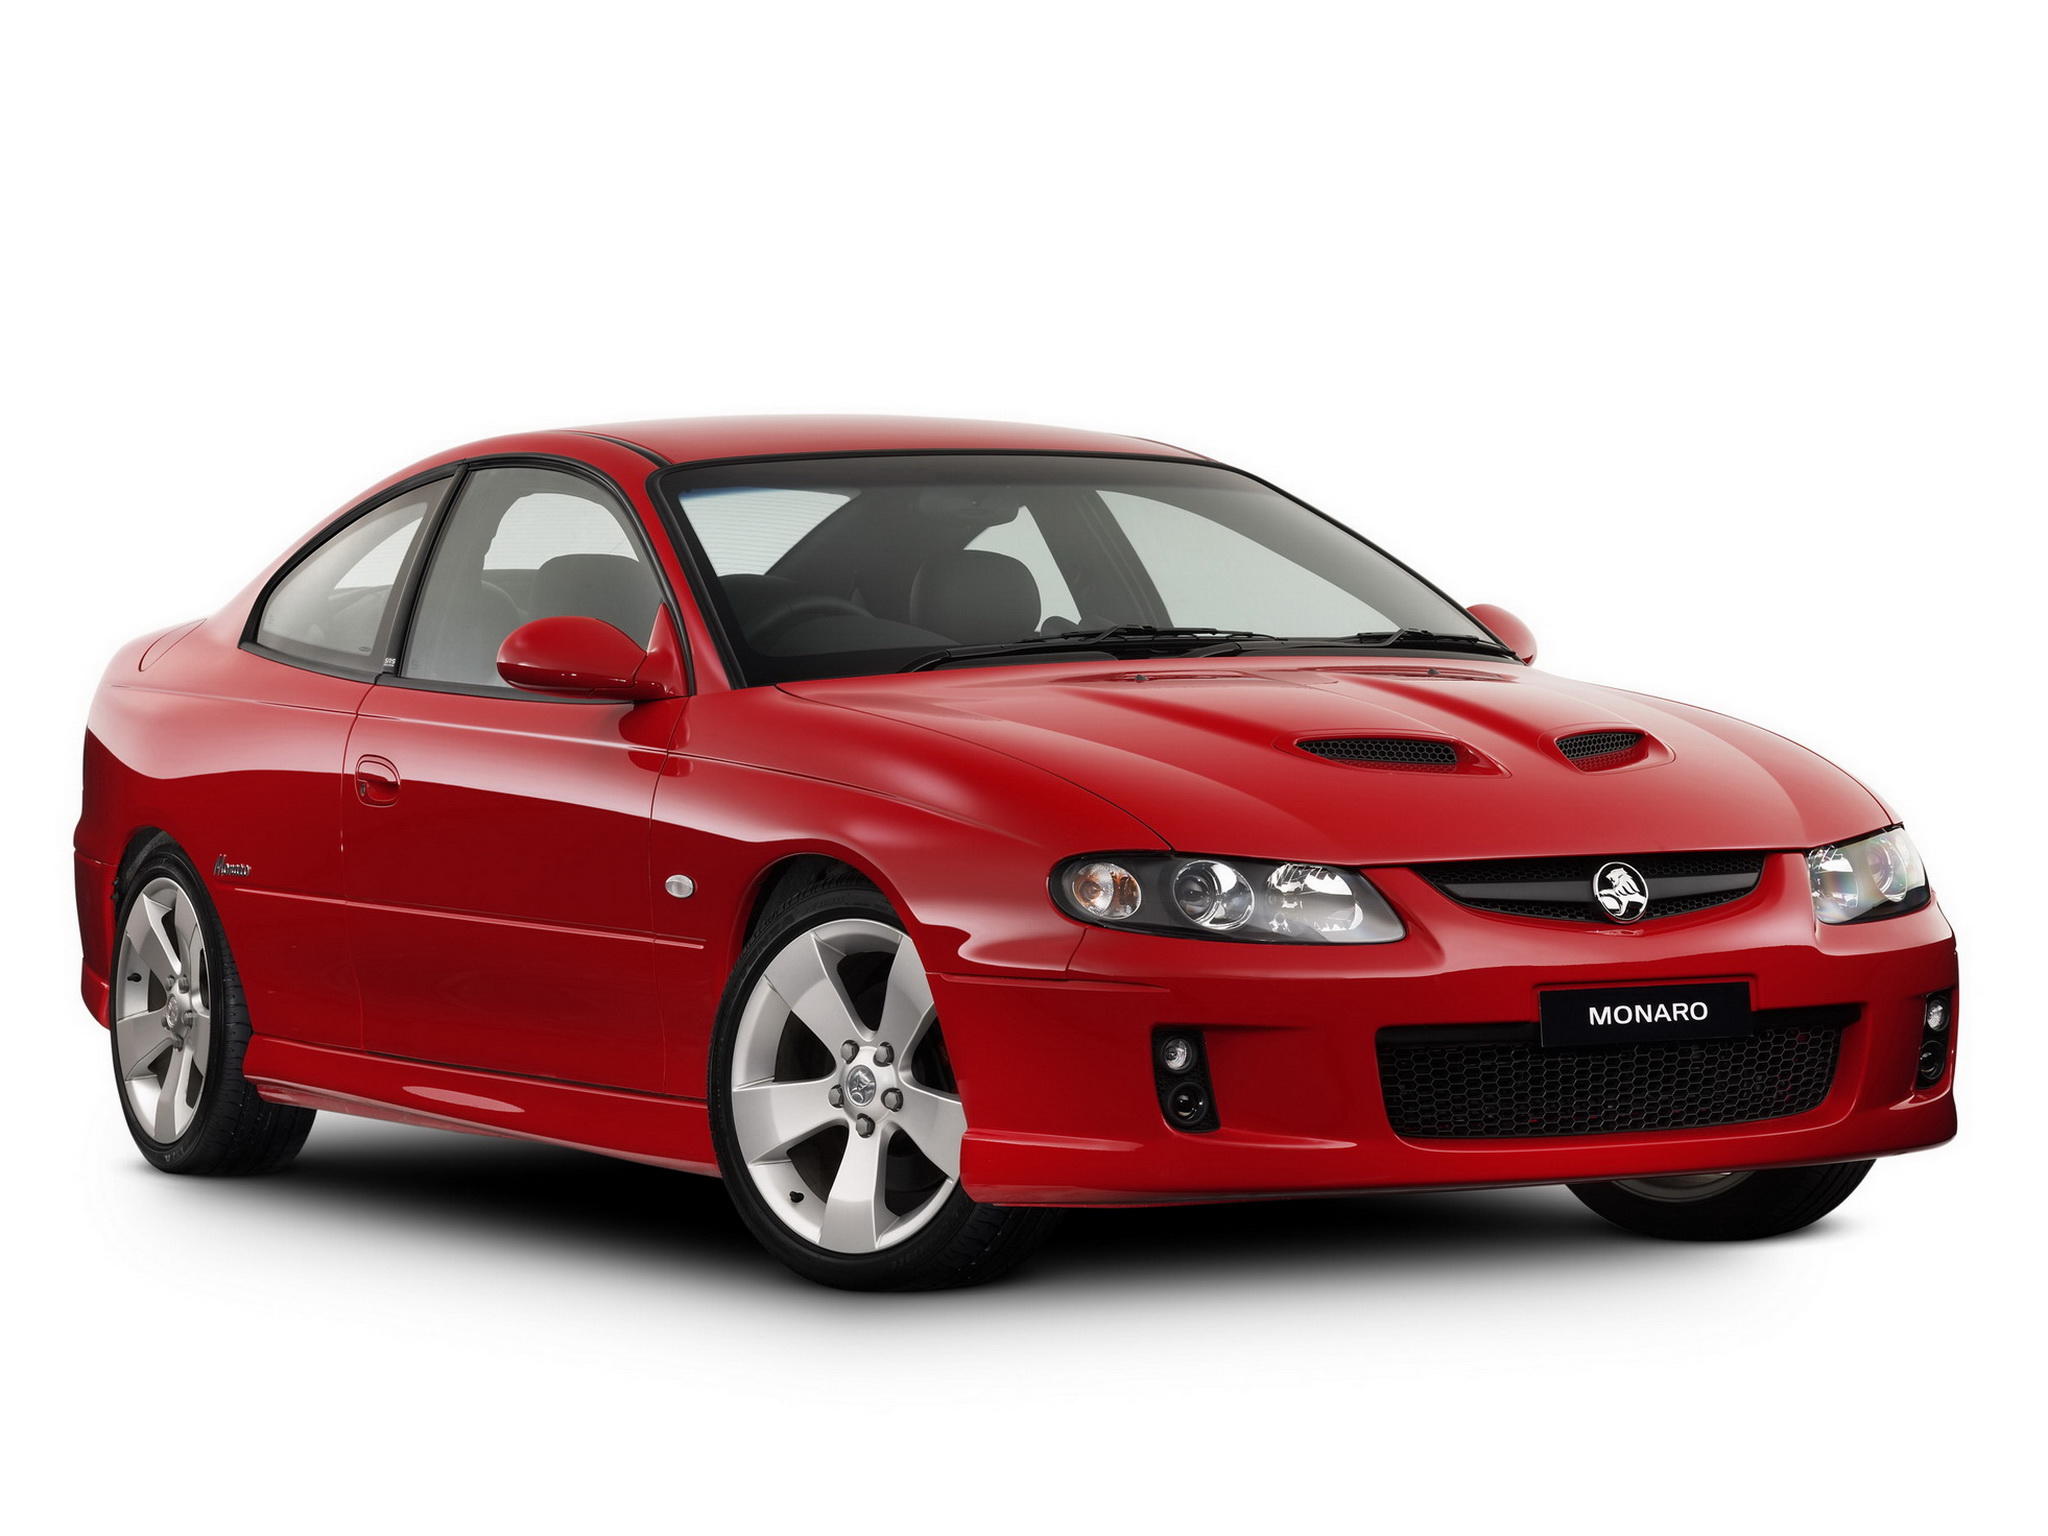 Wallpapers car the Holden Monaro cars on the desktop